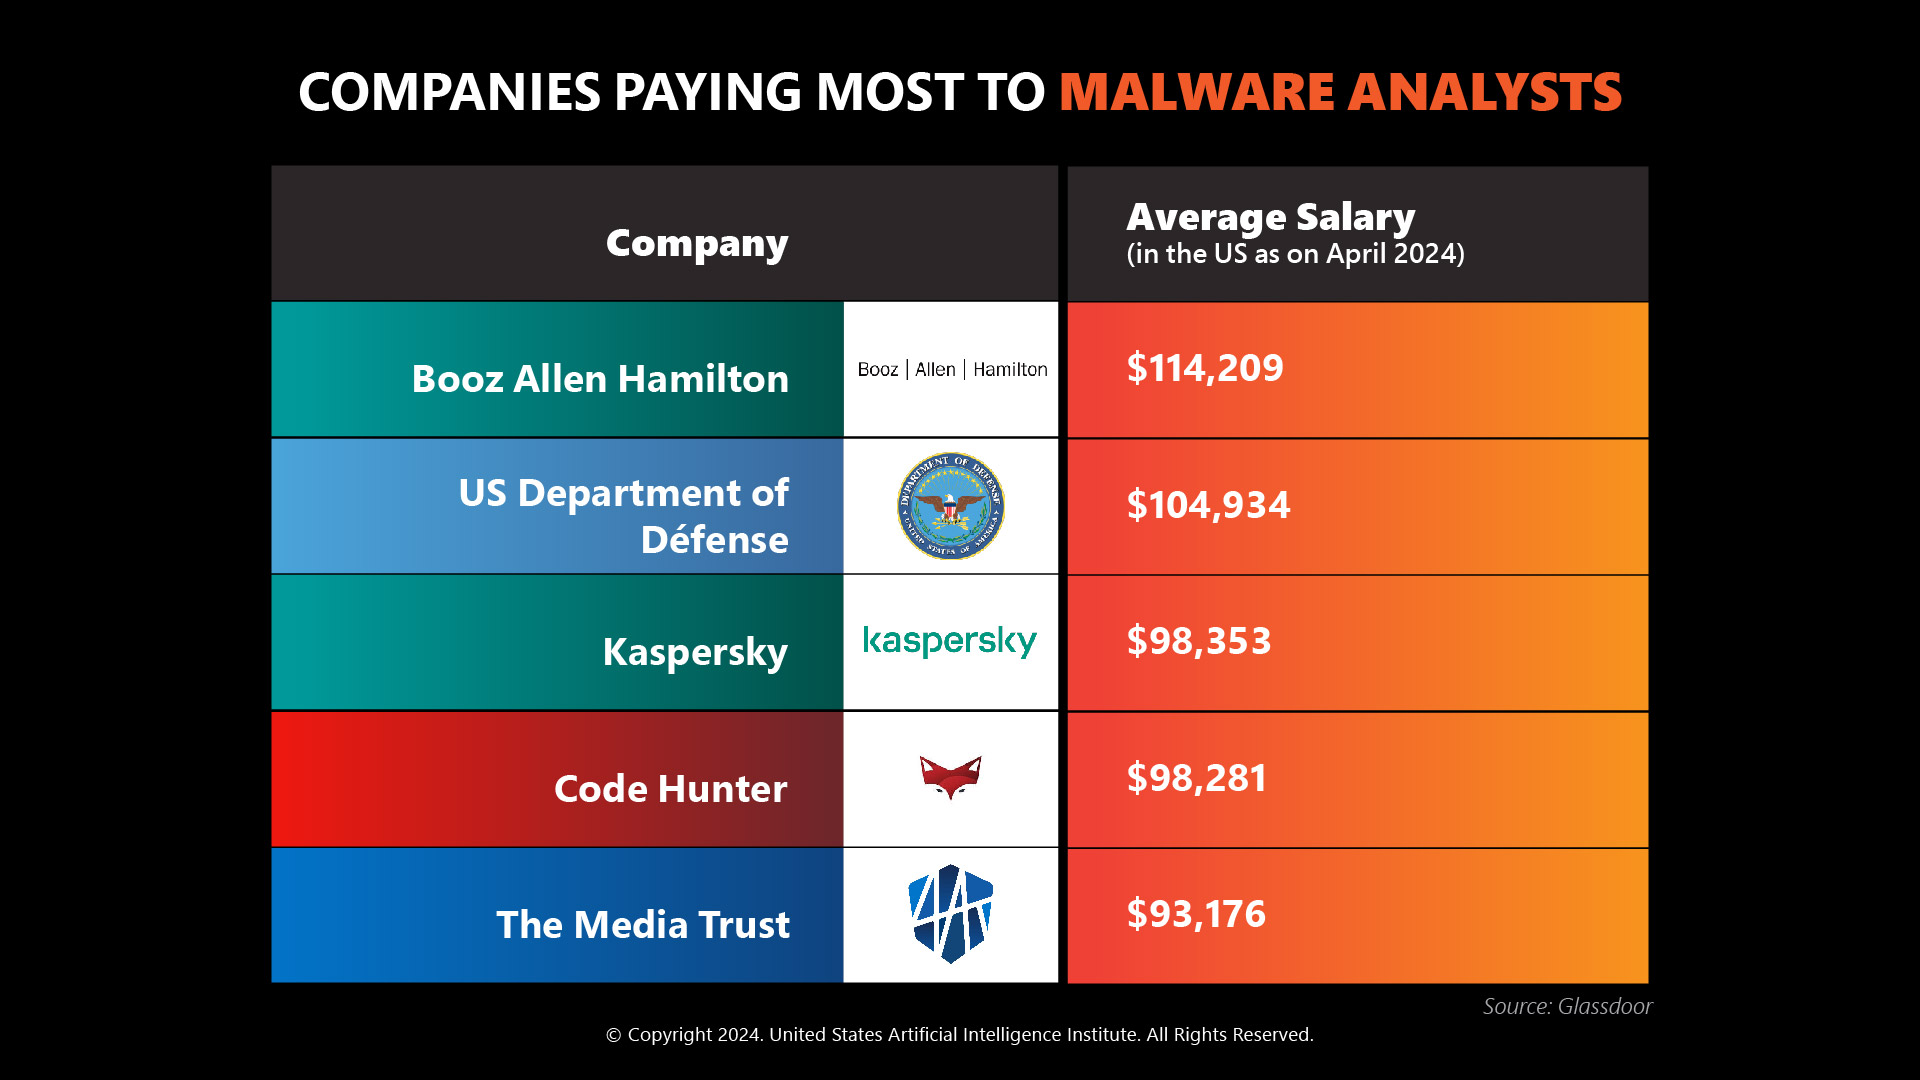 Companies paying most to malware analysts